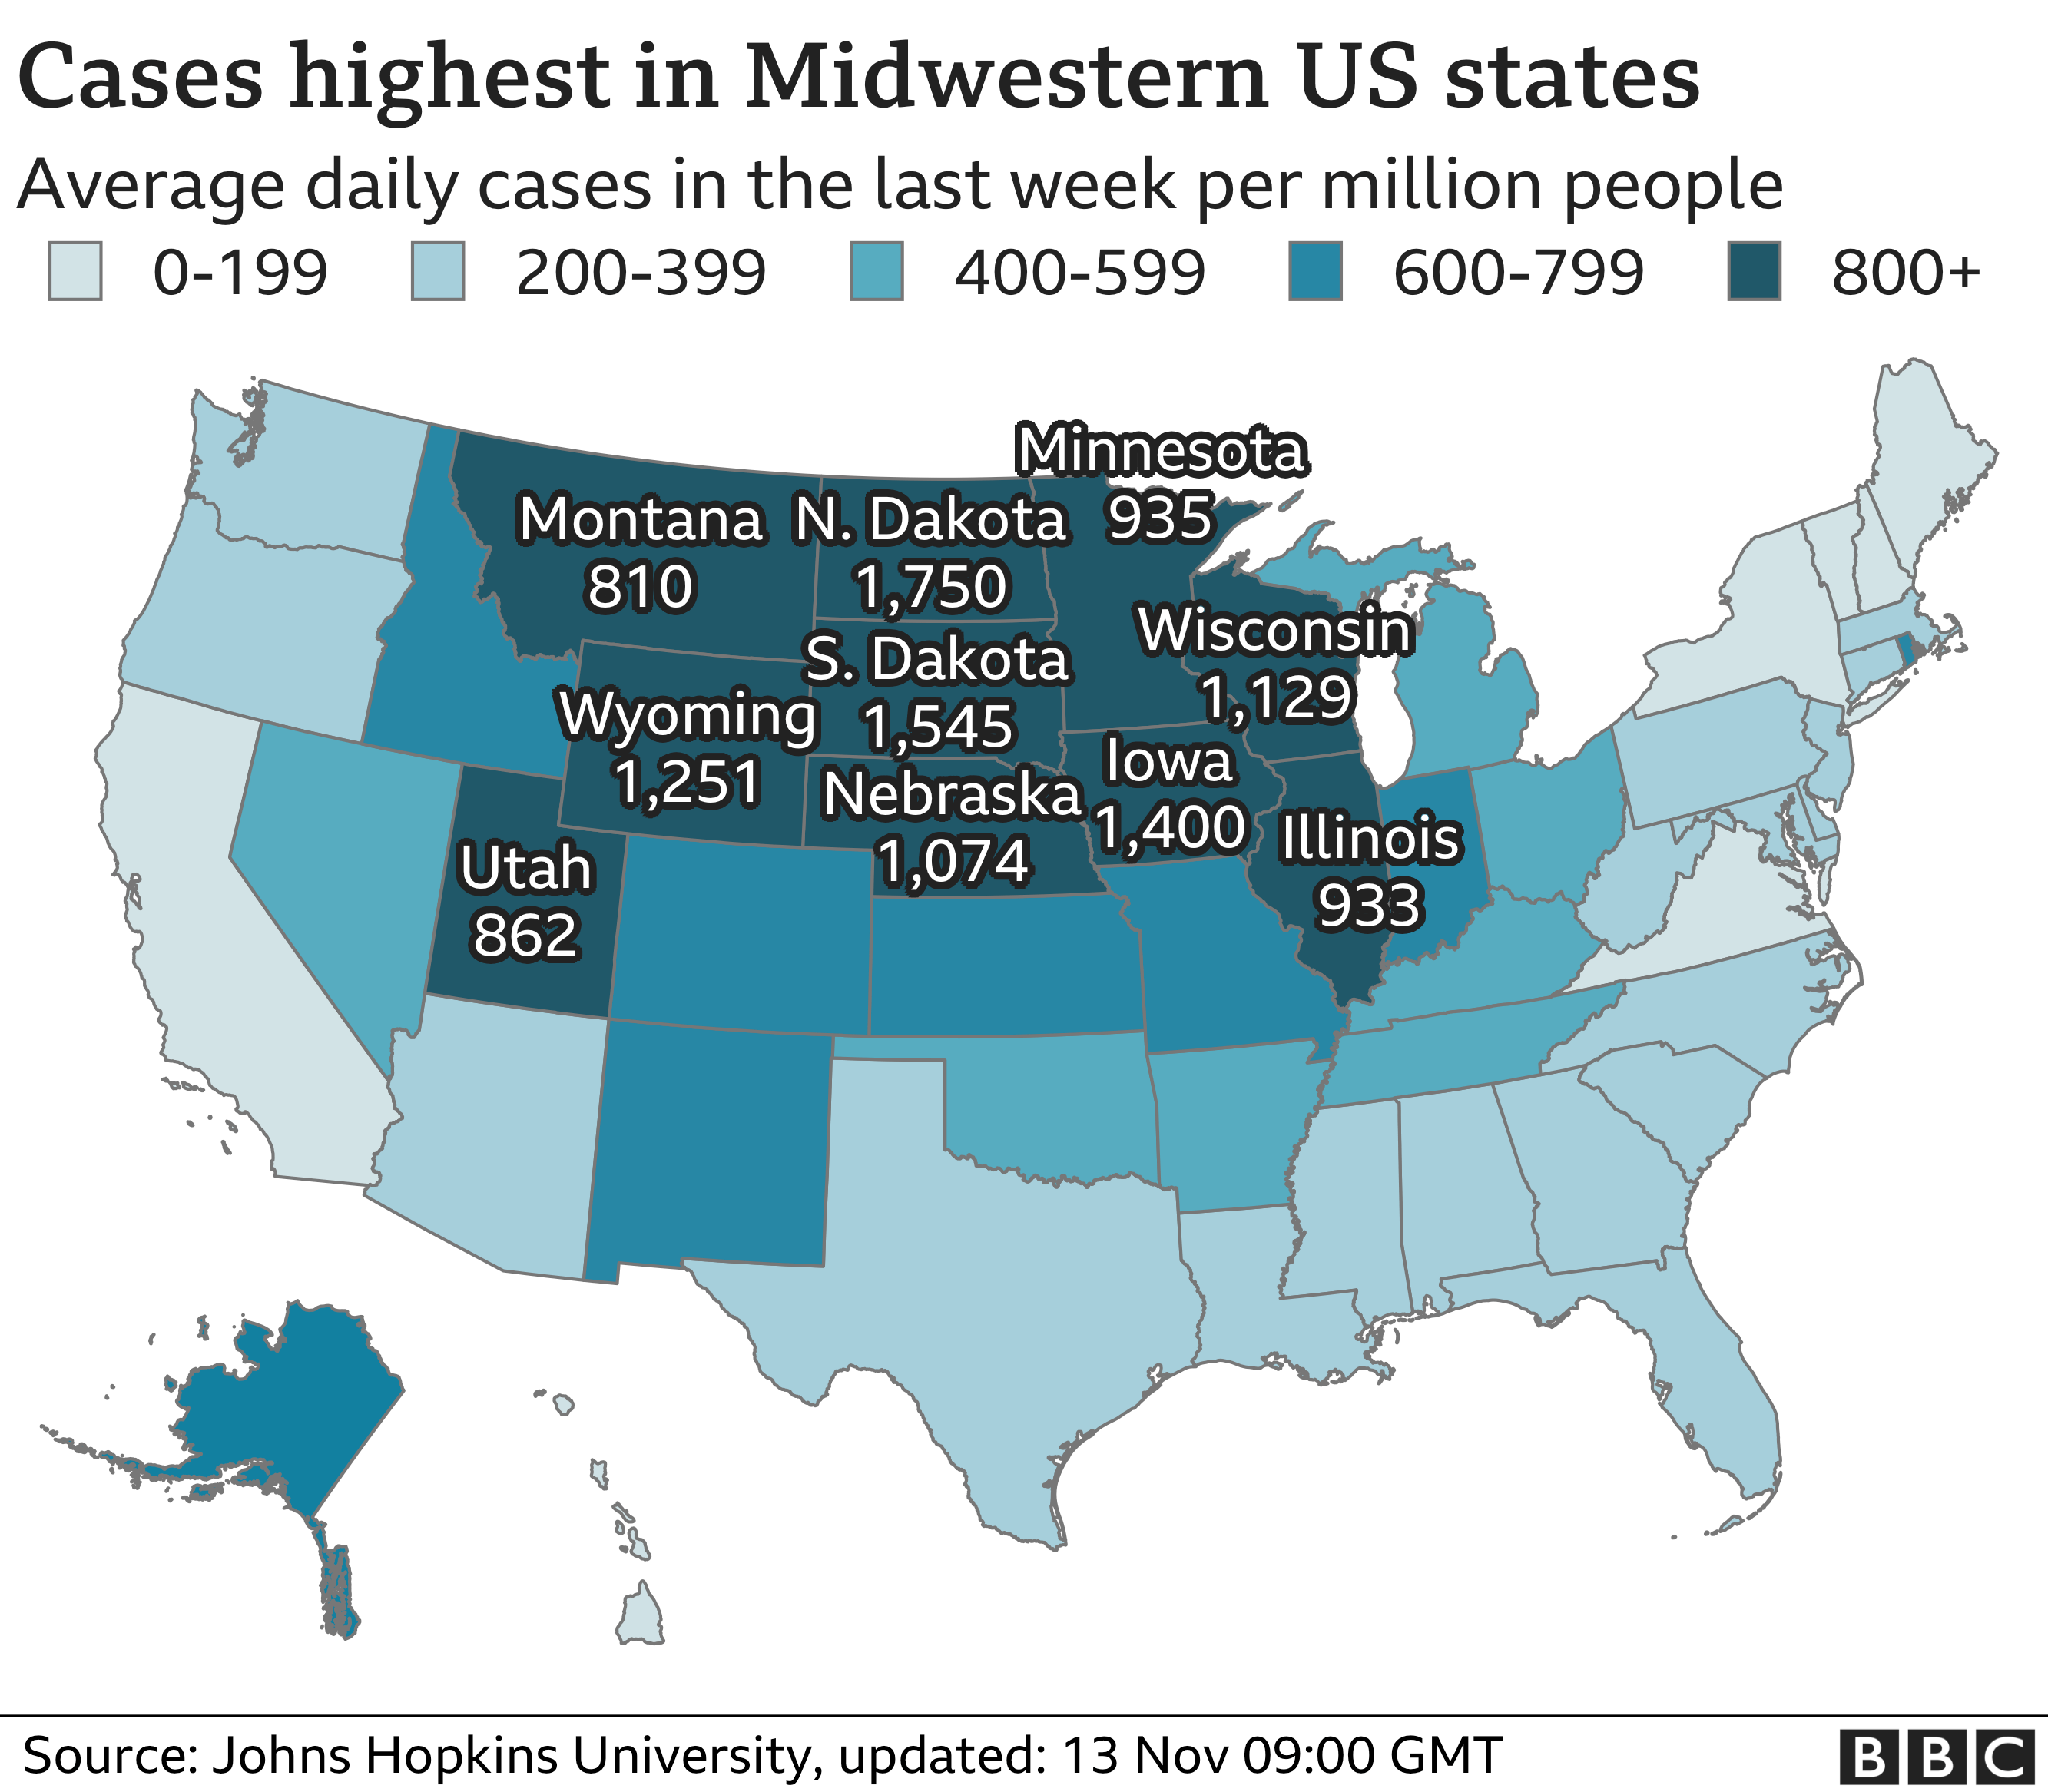 Graphic showing cases high in US medwestern states